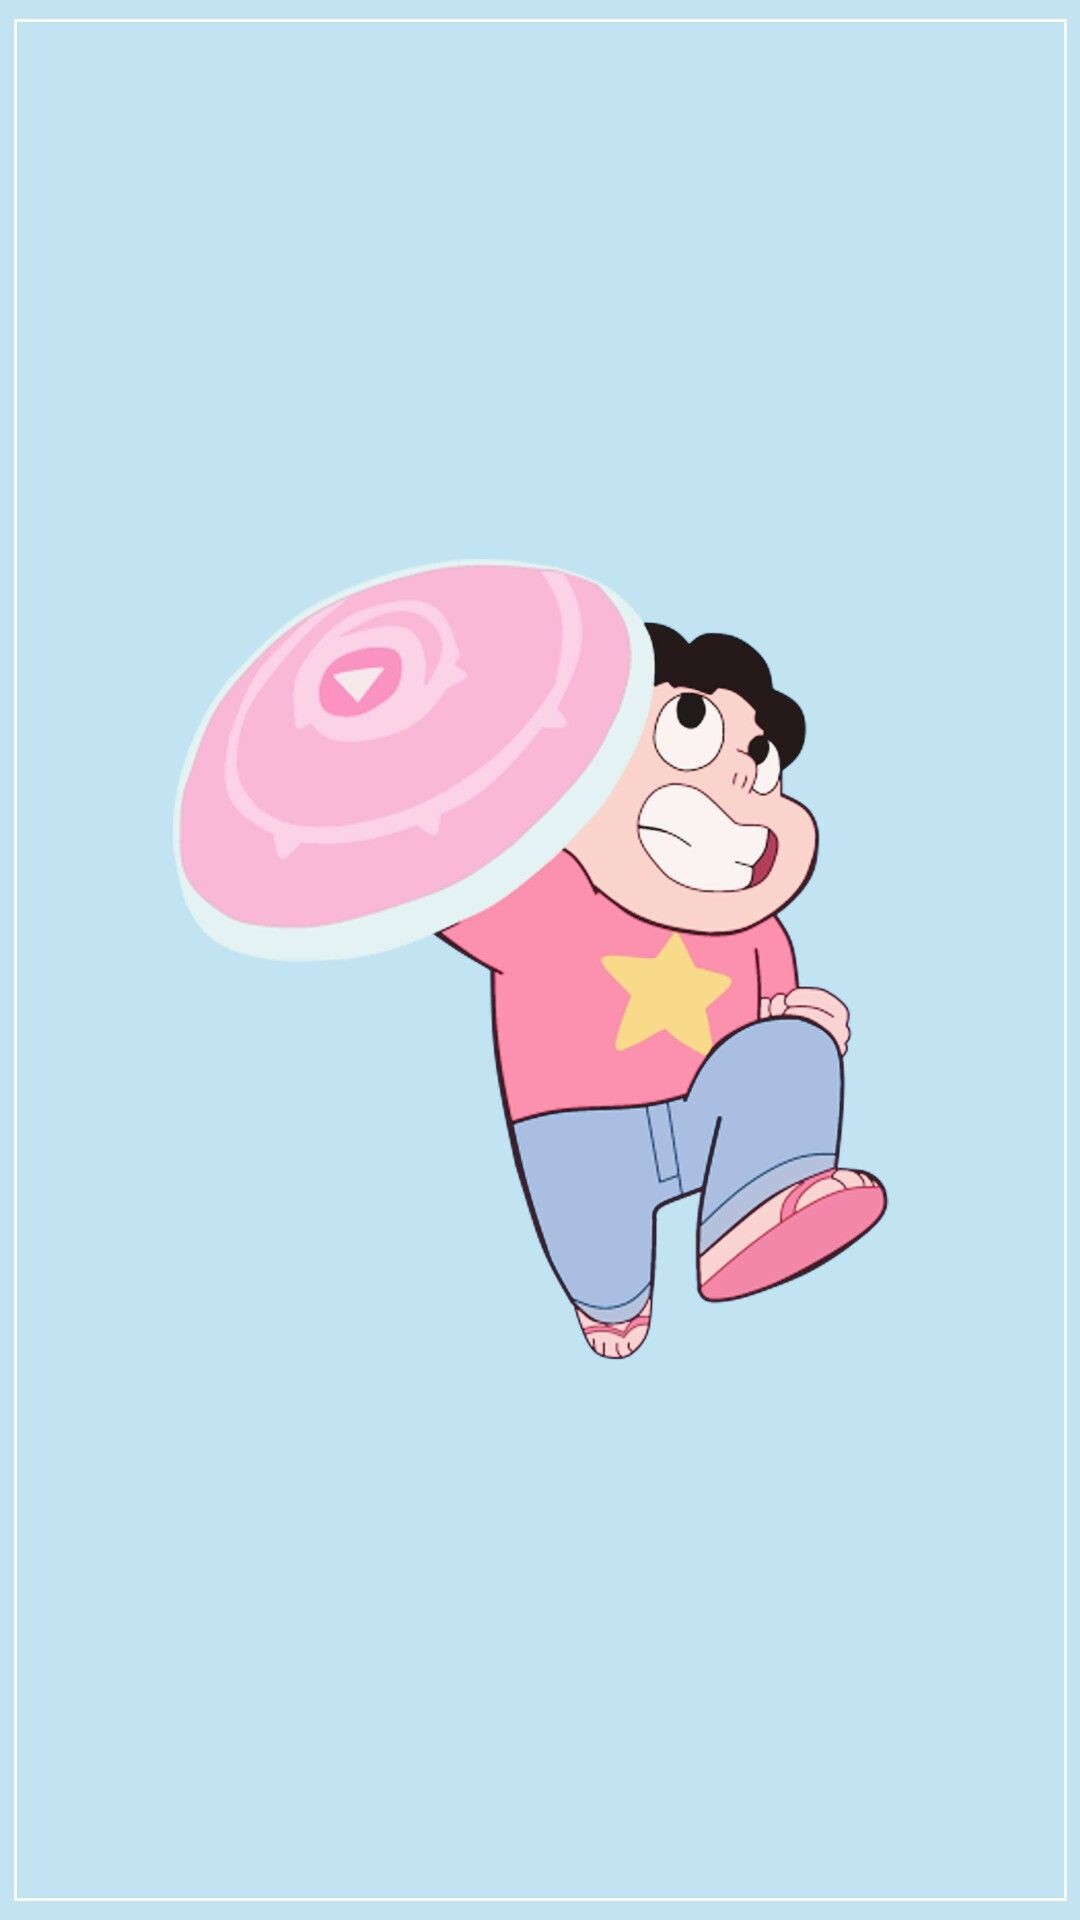 1080x1920 Space Gallery, Steven Universe, Iphone Wallpapers, Universe, Display,  Backgrounds, Iphone